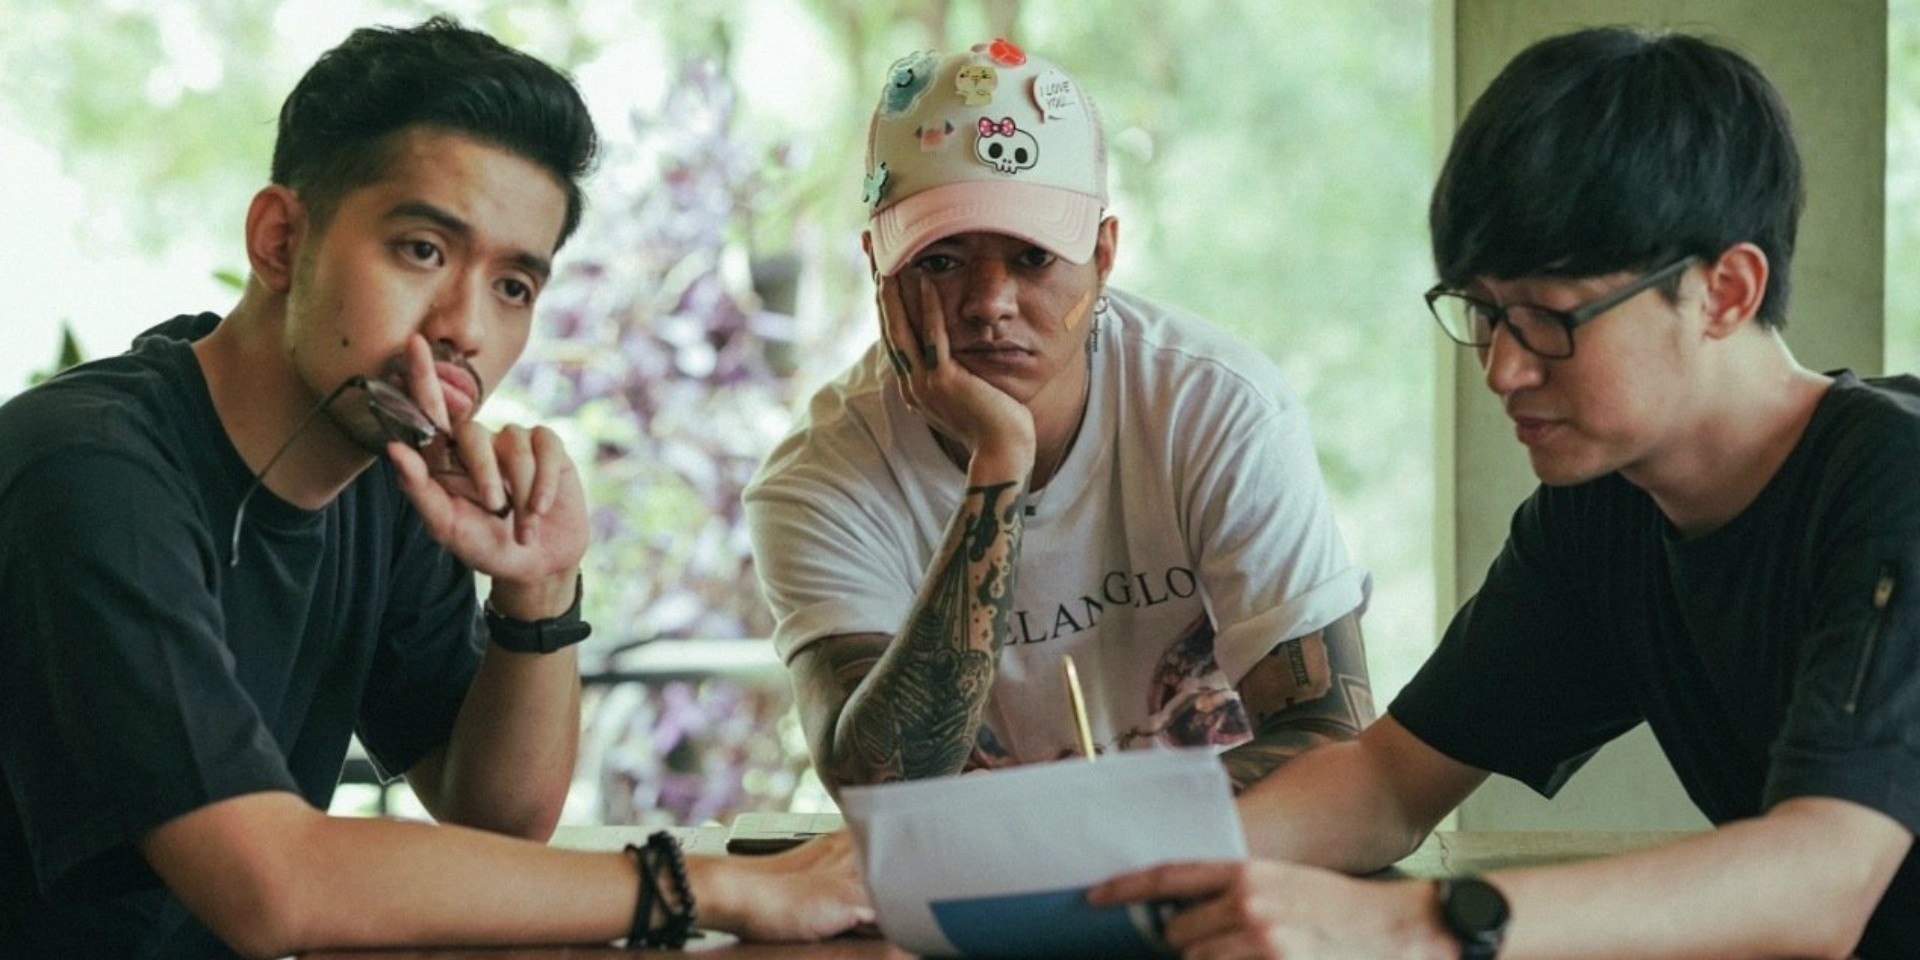 "It's a new milestone for us and Indonesian music": EDM trio Weird Genius sign with Astralwerks